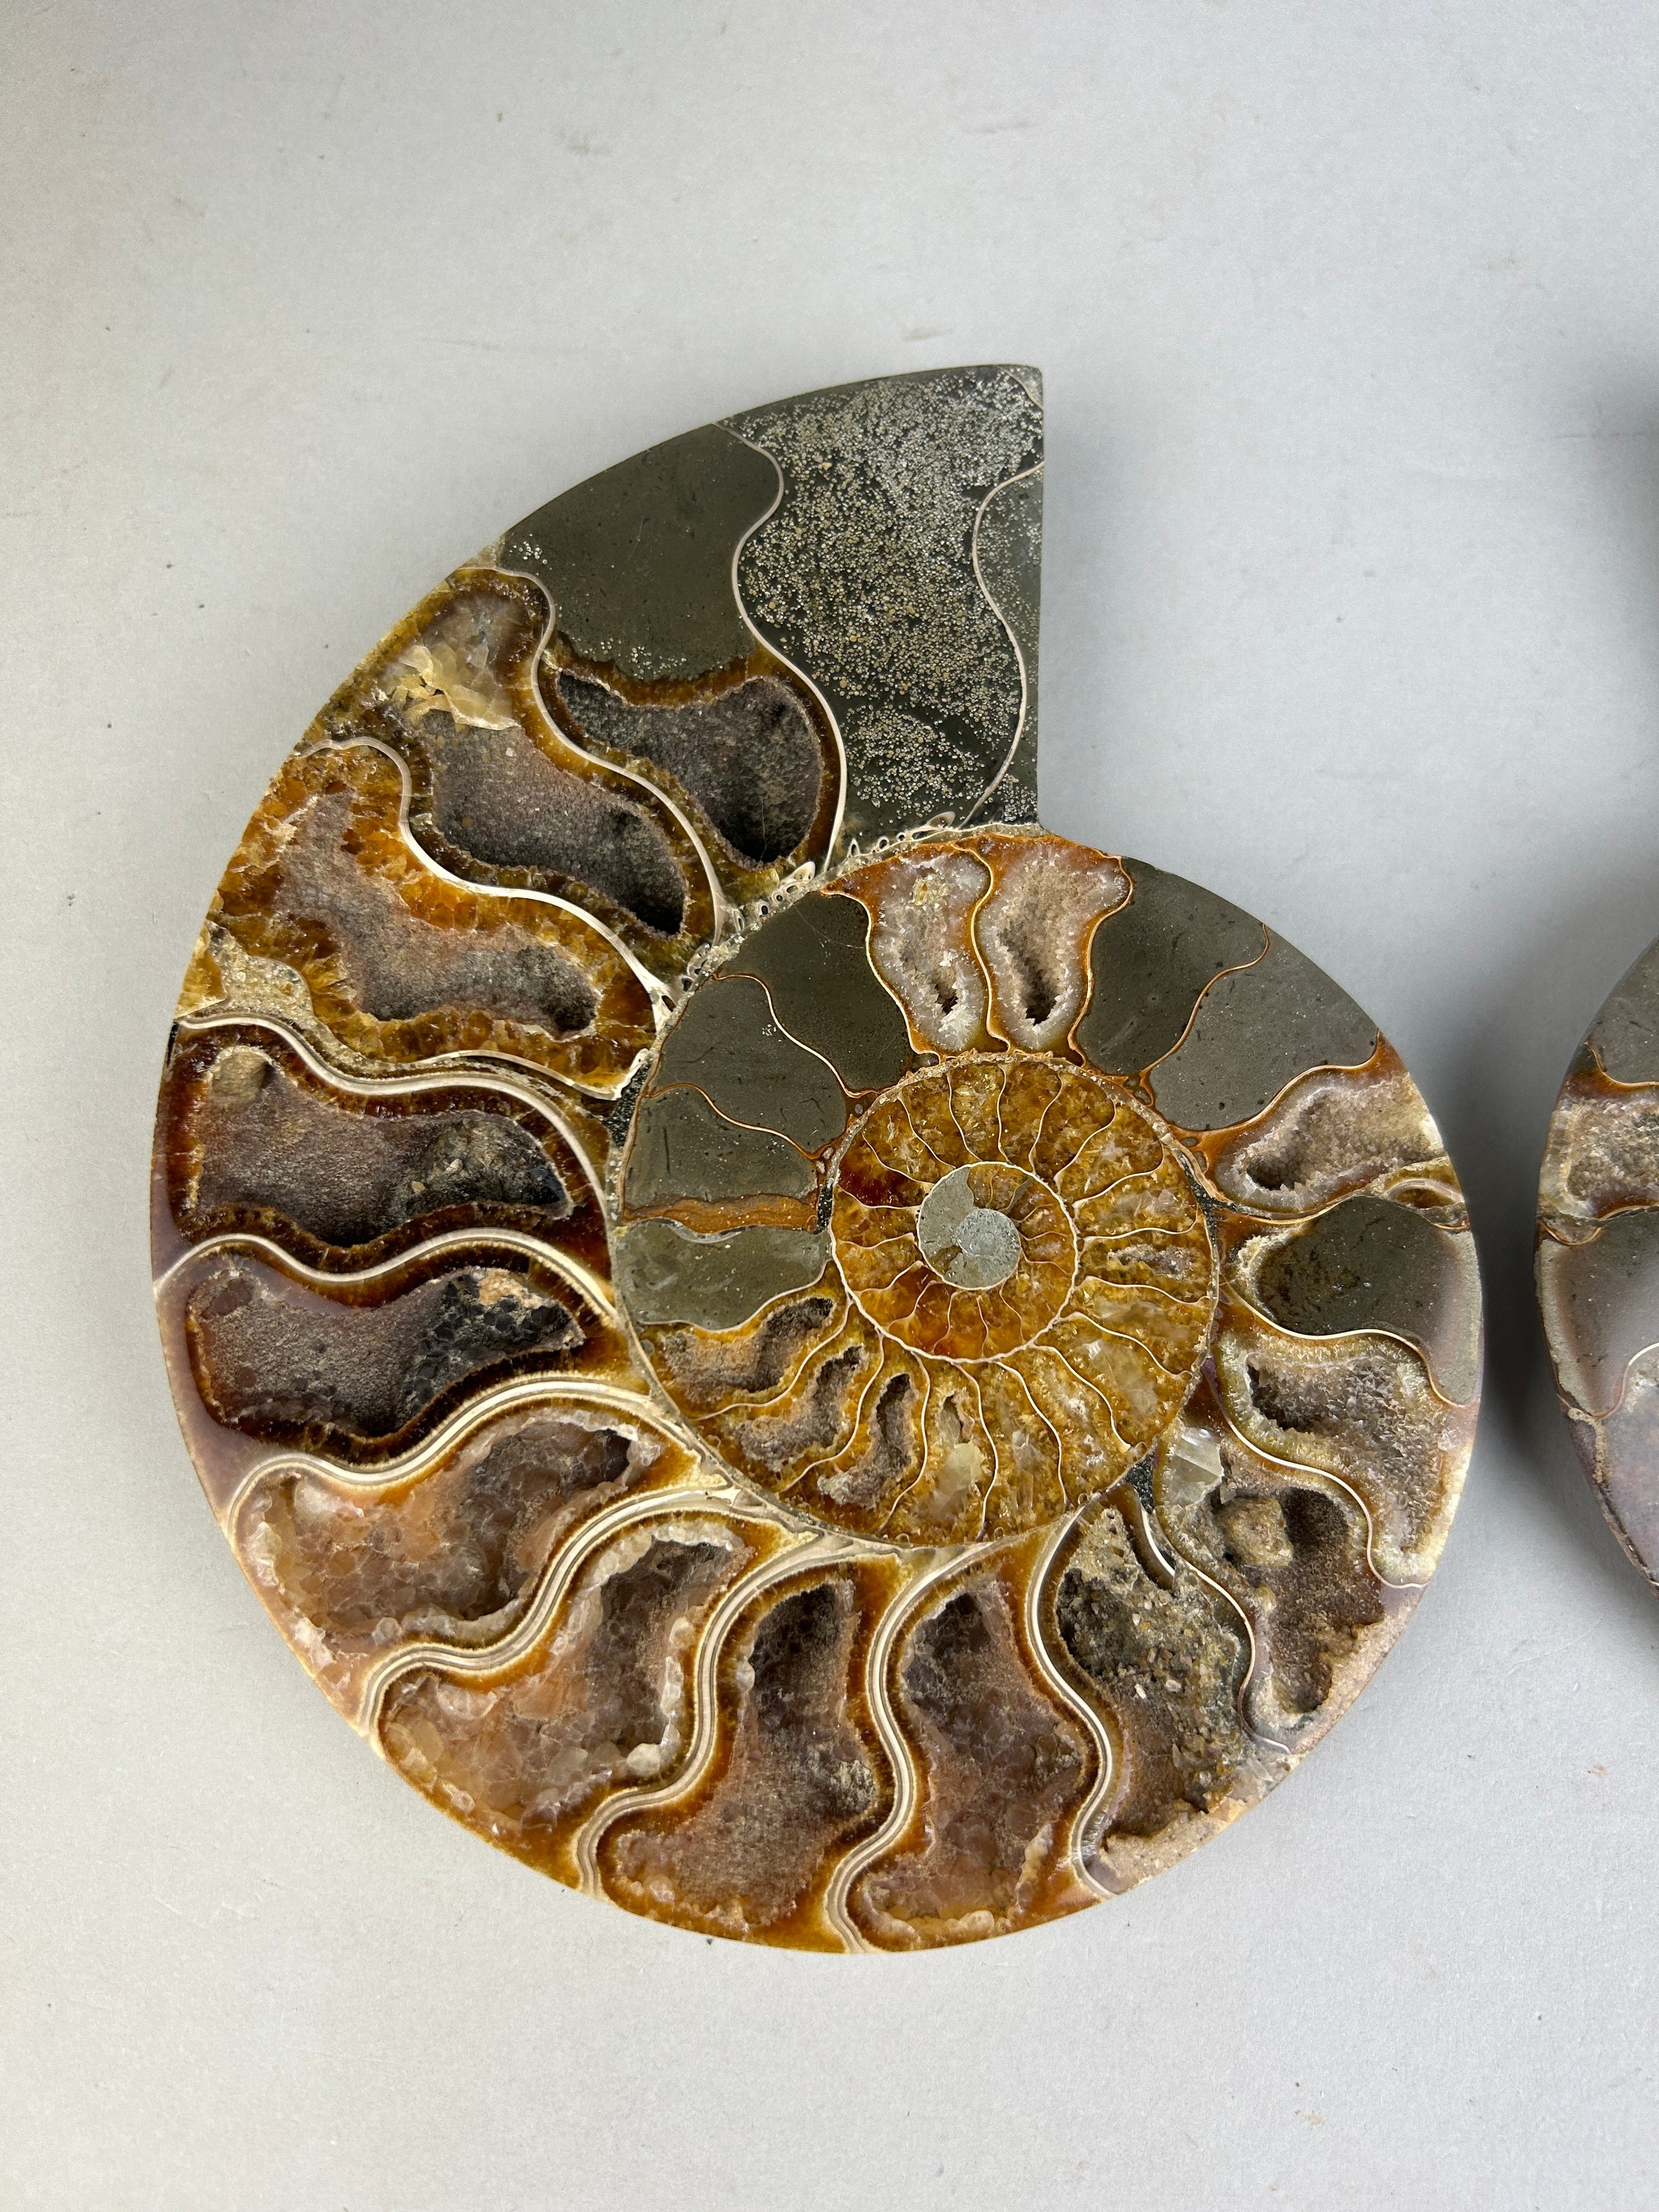 A LARGE CUT AND POLISHED AMMONITE FOSSIL 15cm x 12cm Large Ammonite Fossil from Madagascar, cut - Image 2 of 4